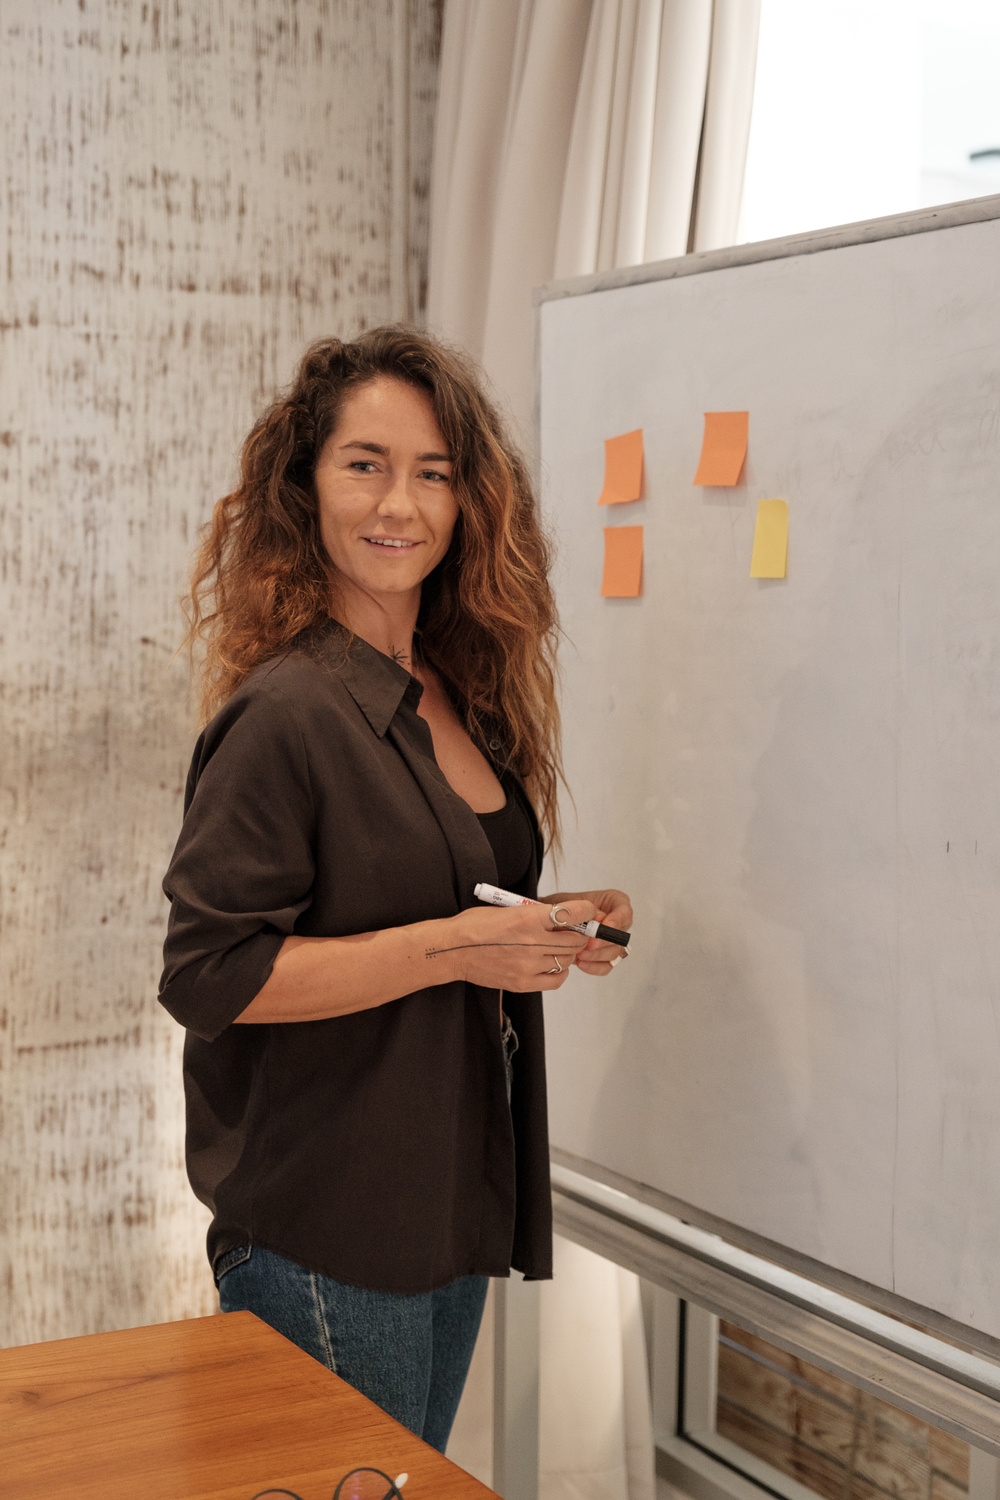 Smiling Woman Standing Near a Whiteboard